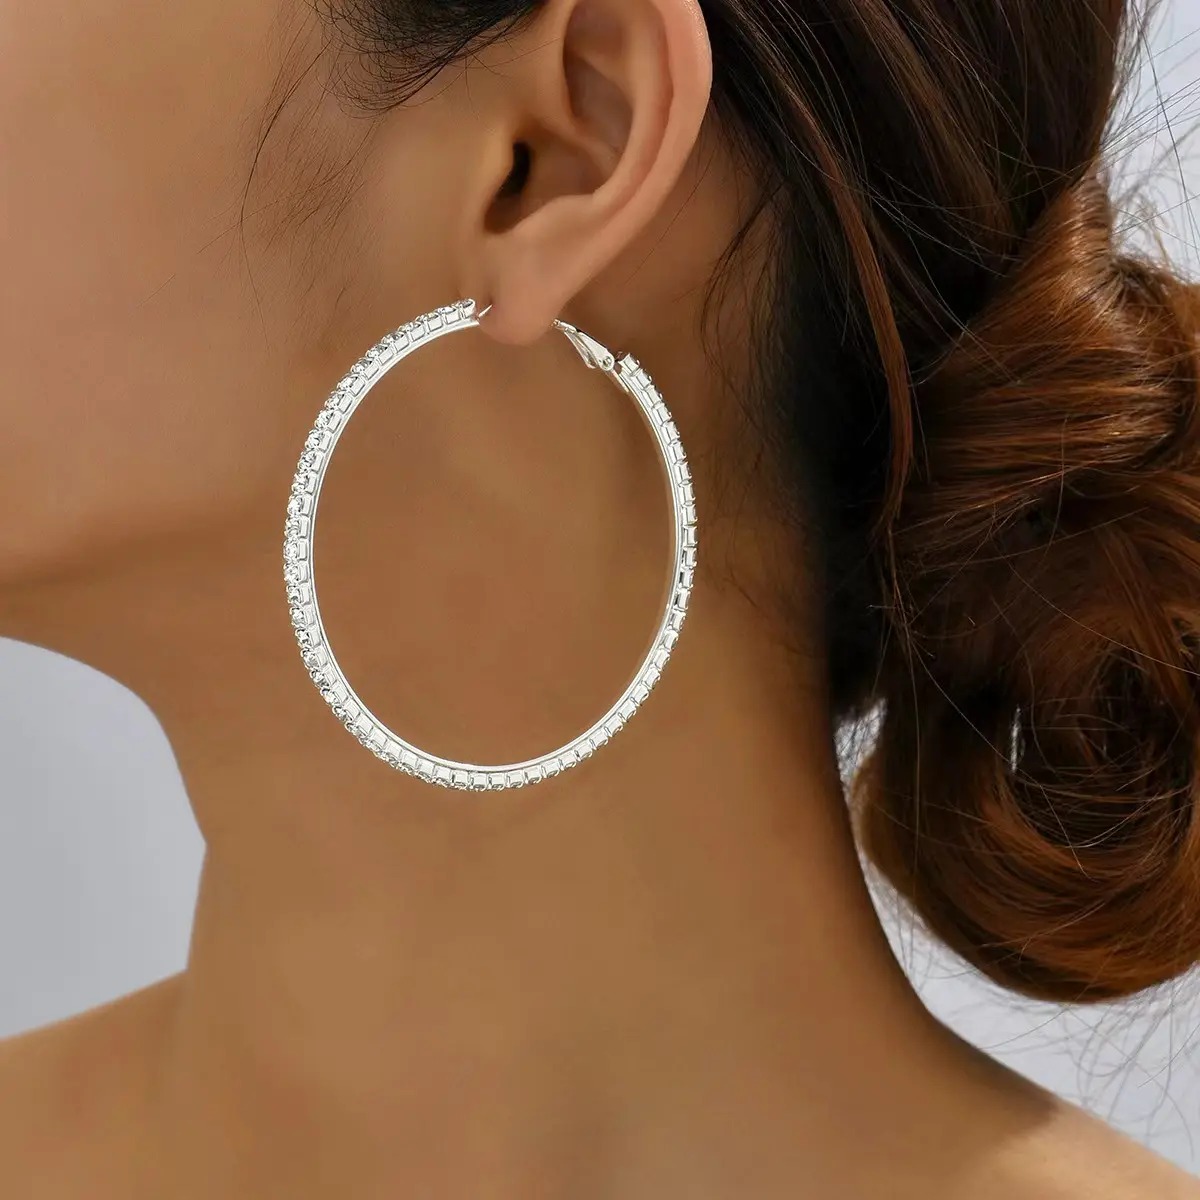 Wholesale accessories Hot sell Fashionable round Exaggeration diamond earrings for women